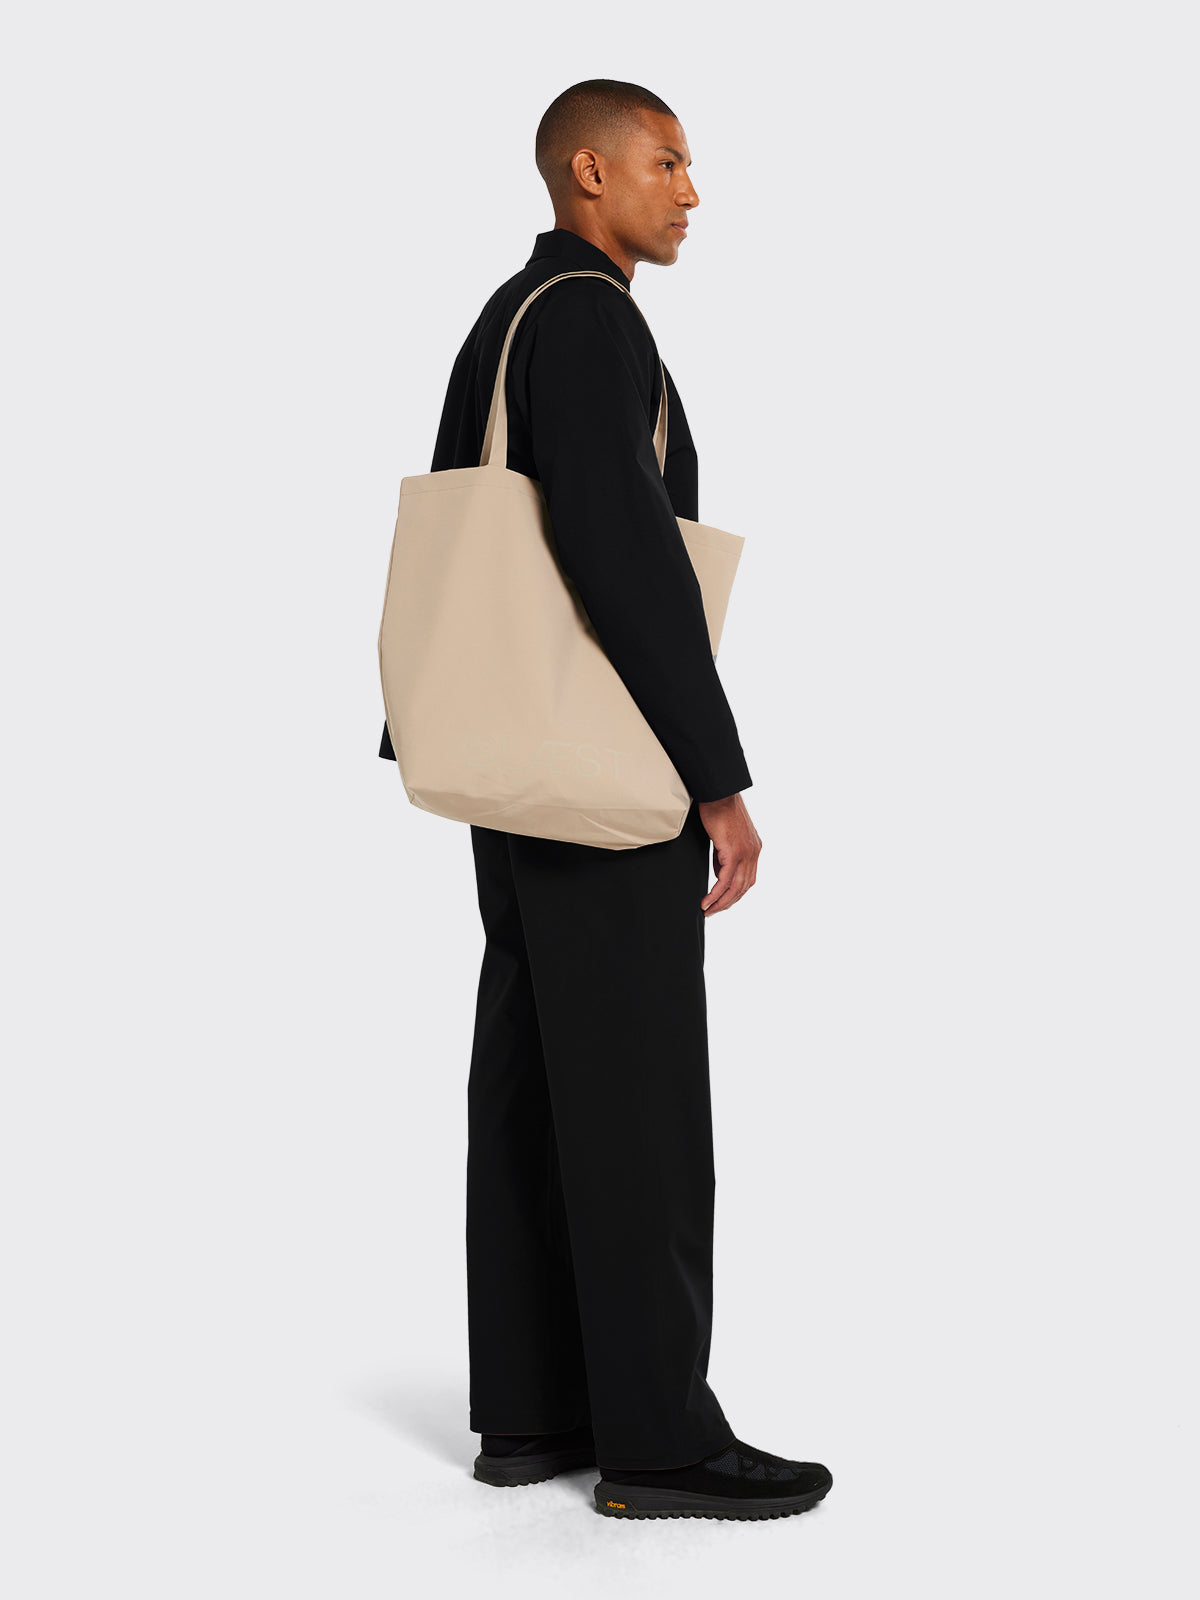 Man with Moa tote bag by Blæst